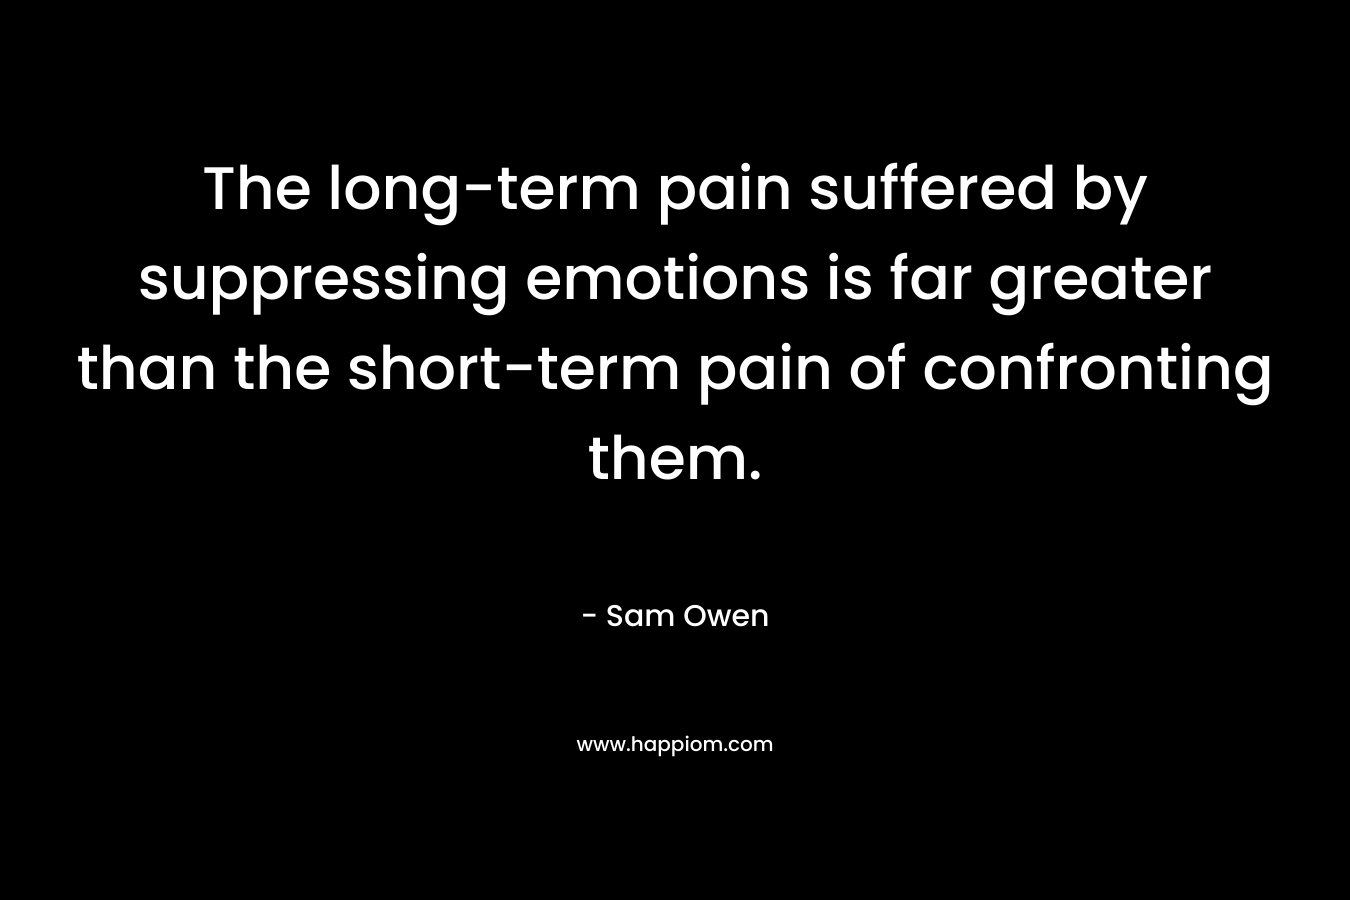 The long-term pain suffered by suppressing emotions is far greater than the short-term pain of confronting them. – Sam Owen